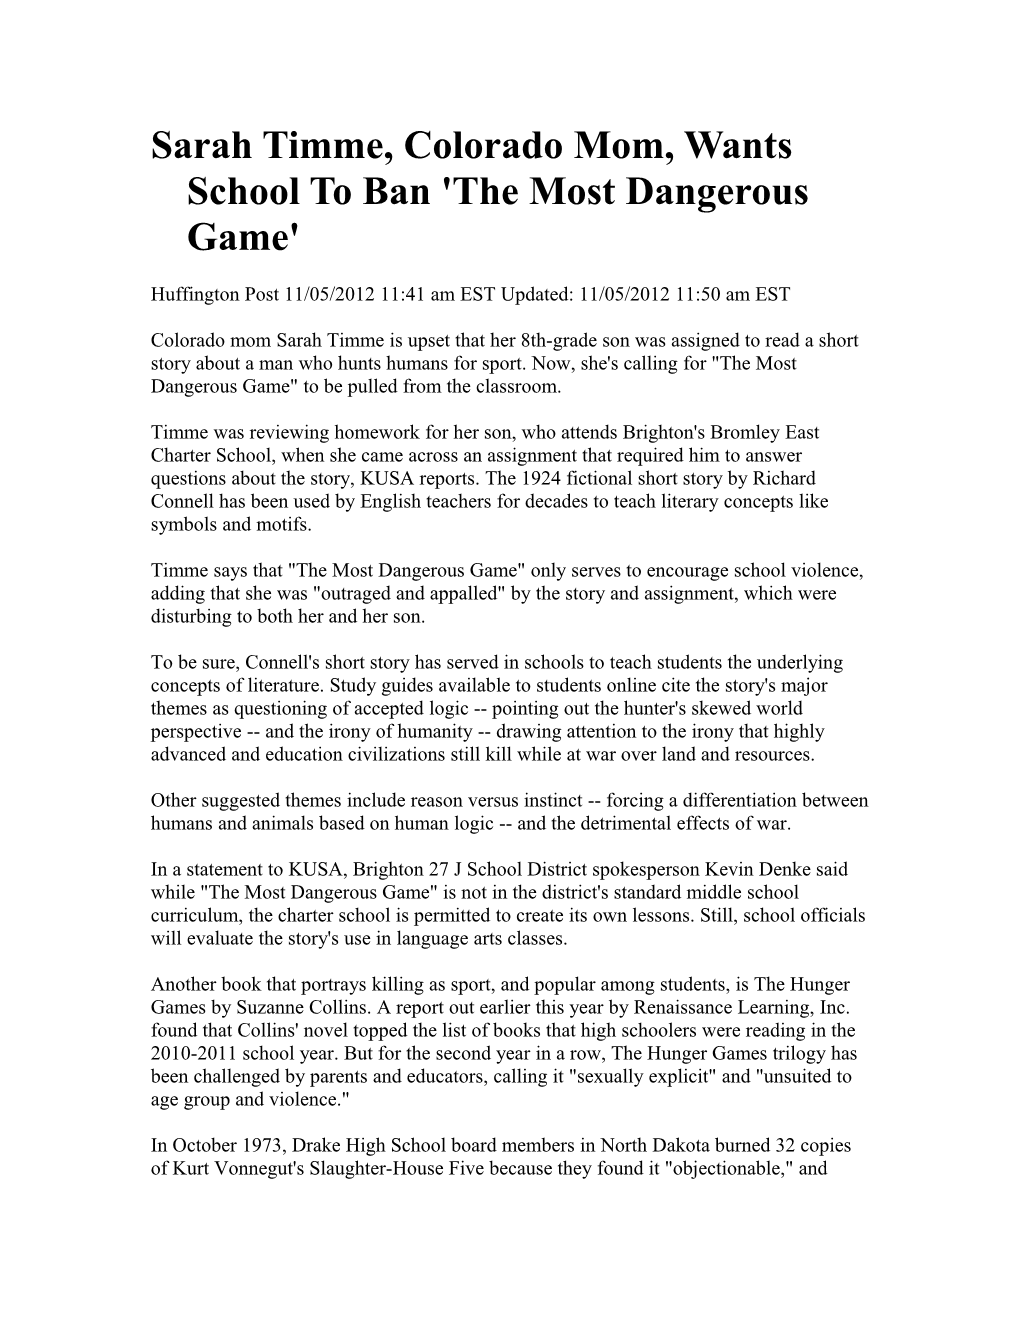 Sarah Timme, Colorado Mom, Wants School to Ban 'The Most Dangerous Game'